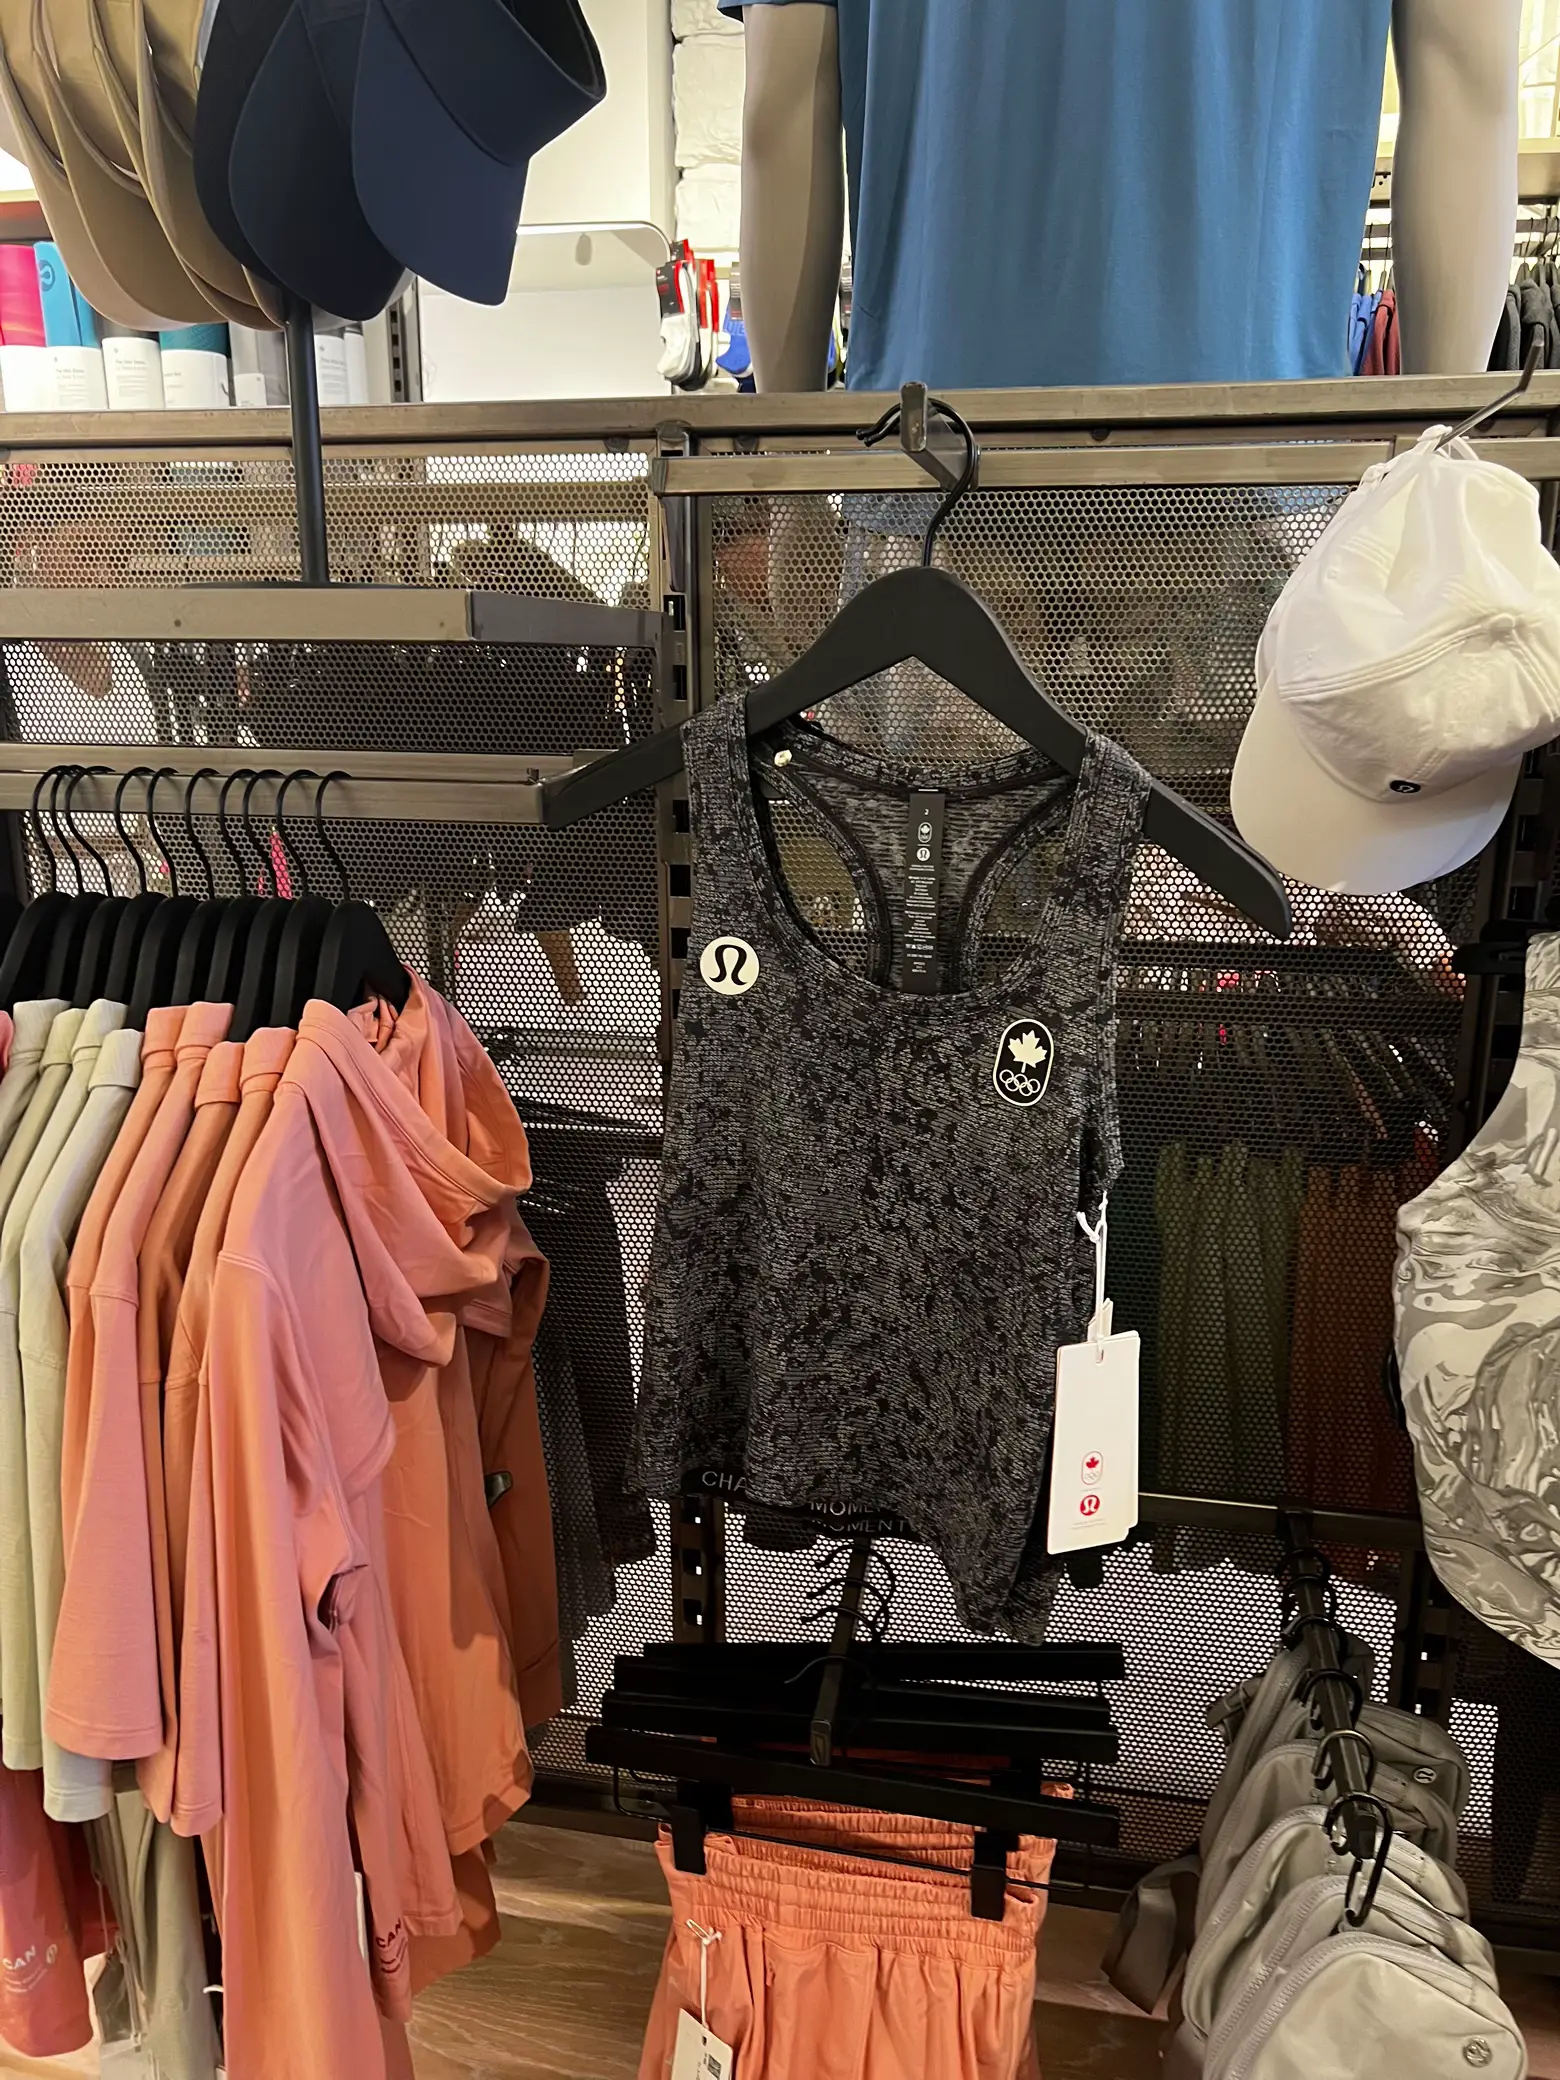 Shopping At Lululemon Outlet Store 2021, New Finds at Lululemon